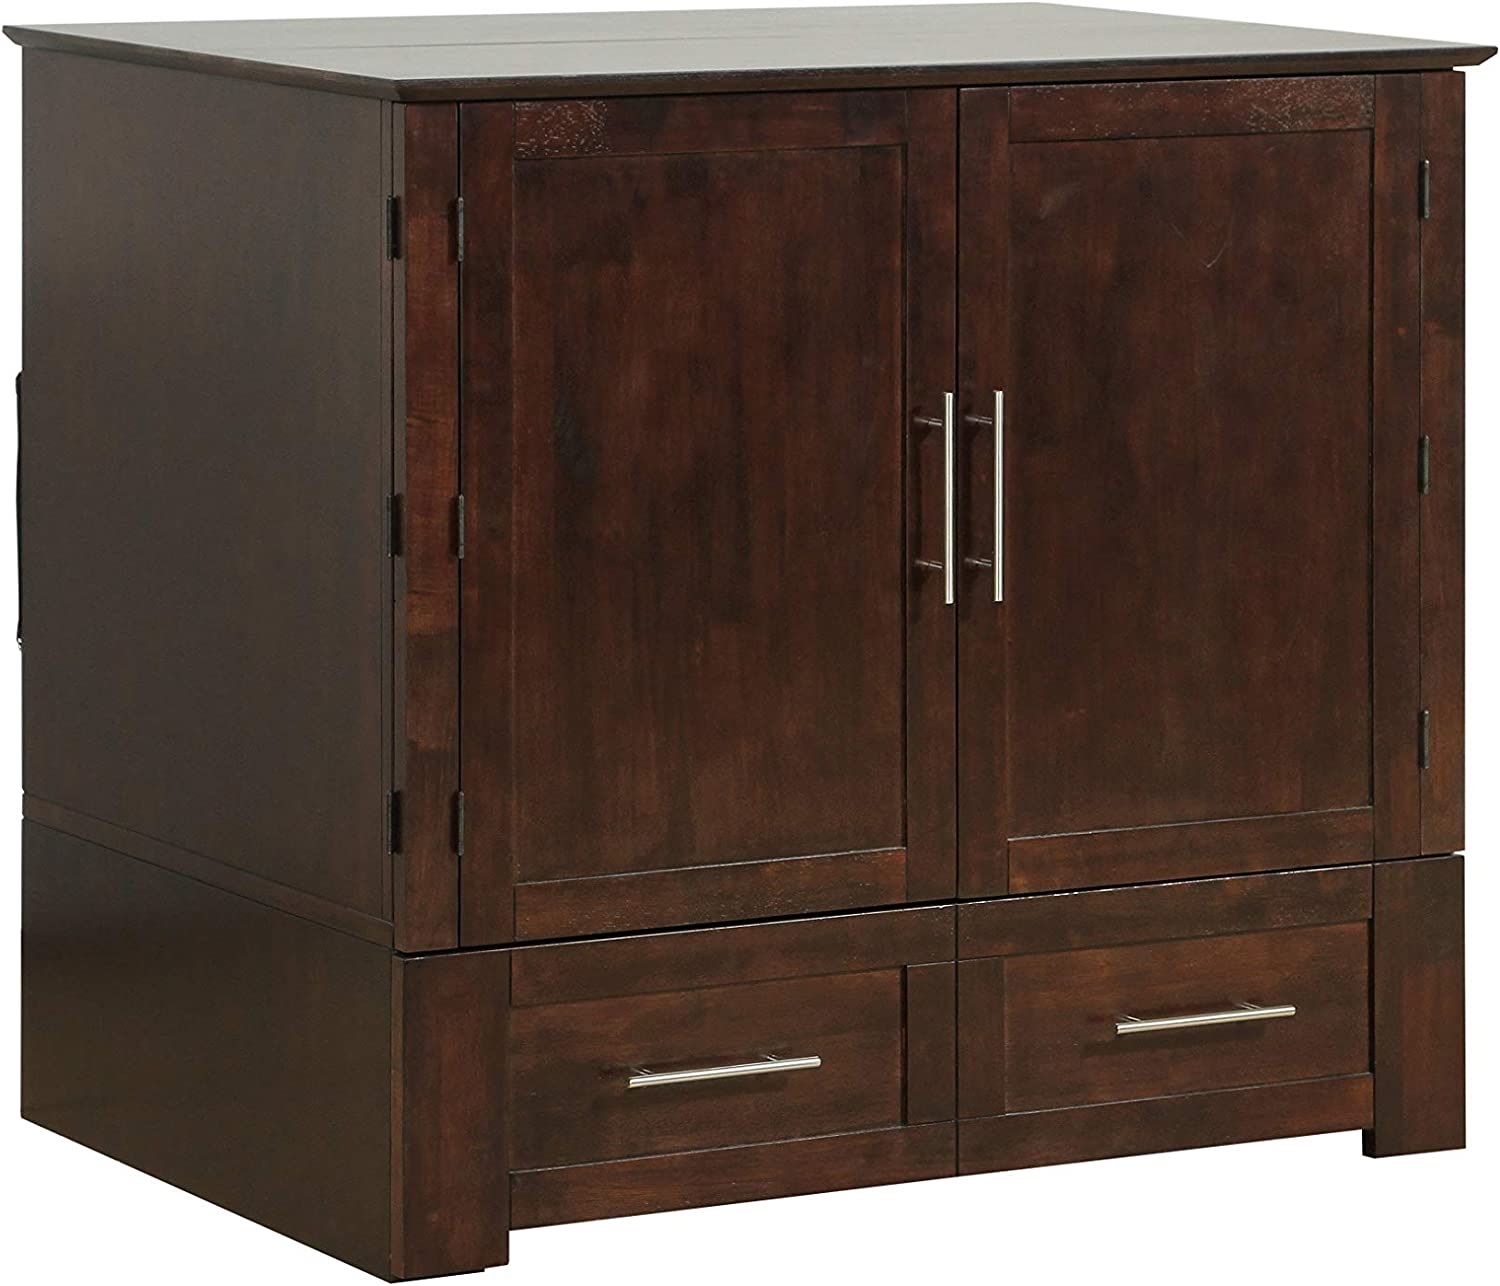 Emurphybed Daily Delight Murphy Cabinet Chest Bed